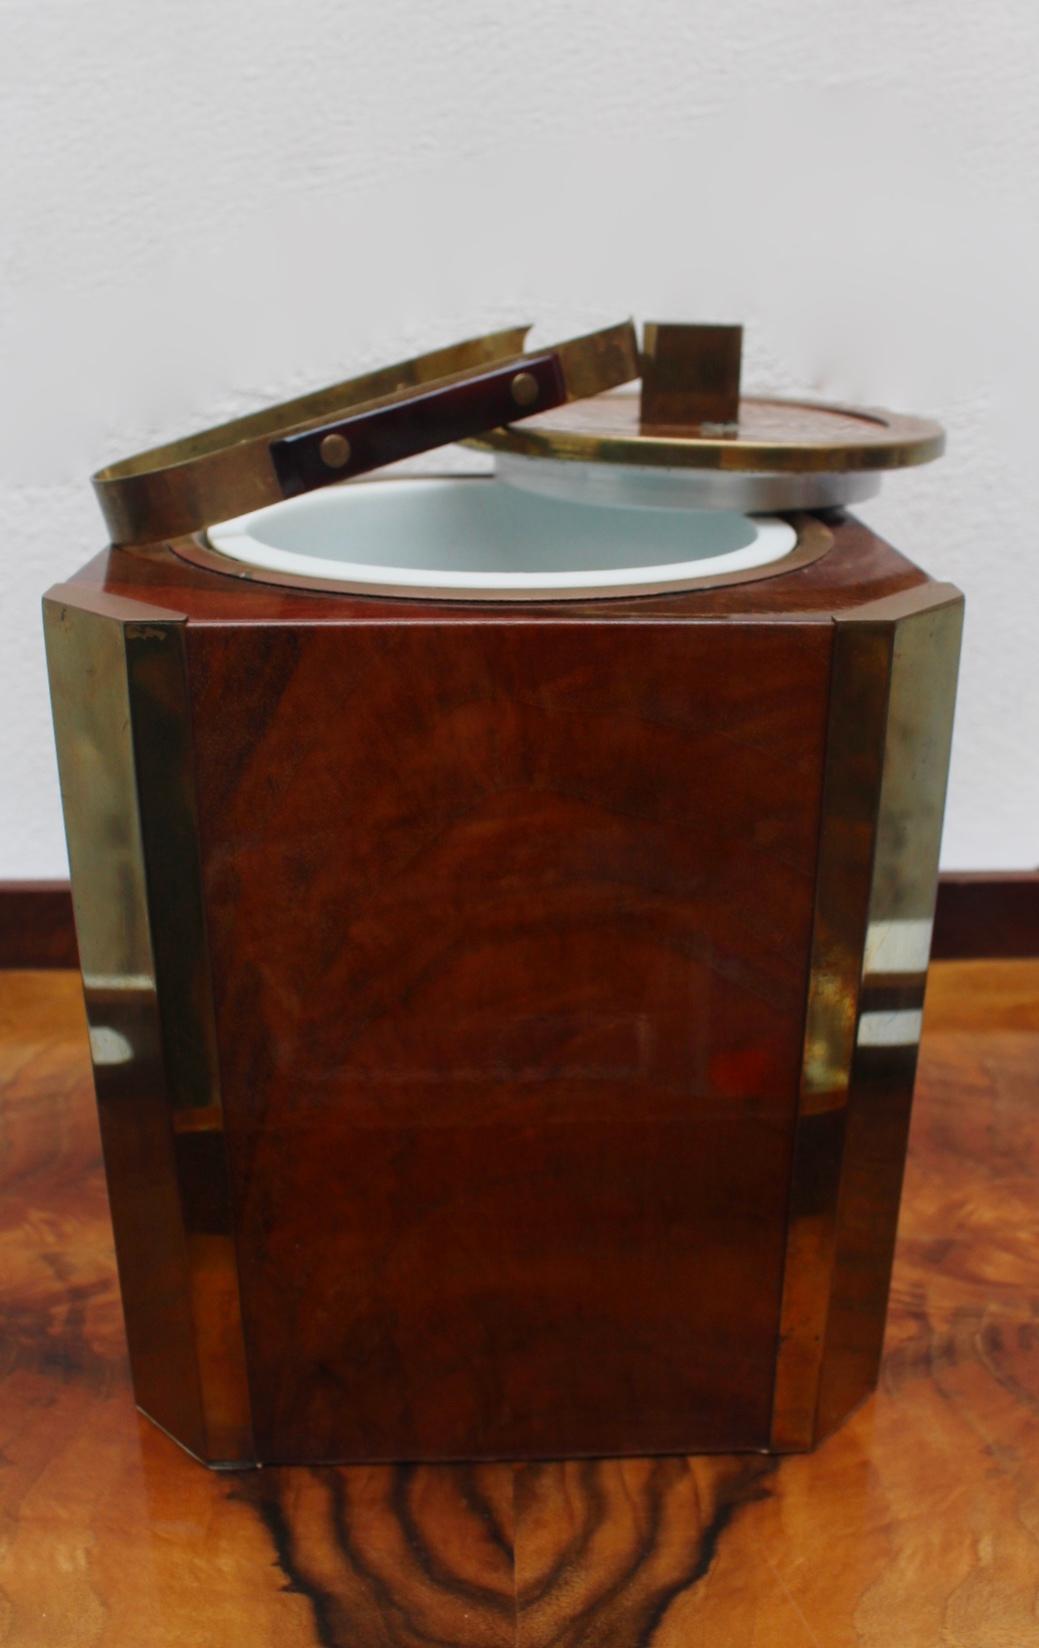 Midcentury hard wood ice bucket with matching tray, 1970s.
Tray measures: 55cm x 41cm / 21.6in x 16.14in.